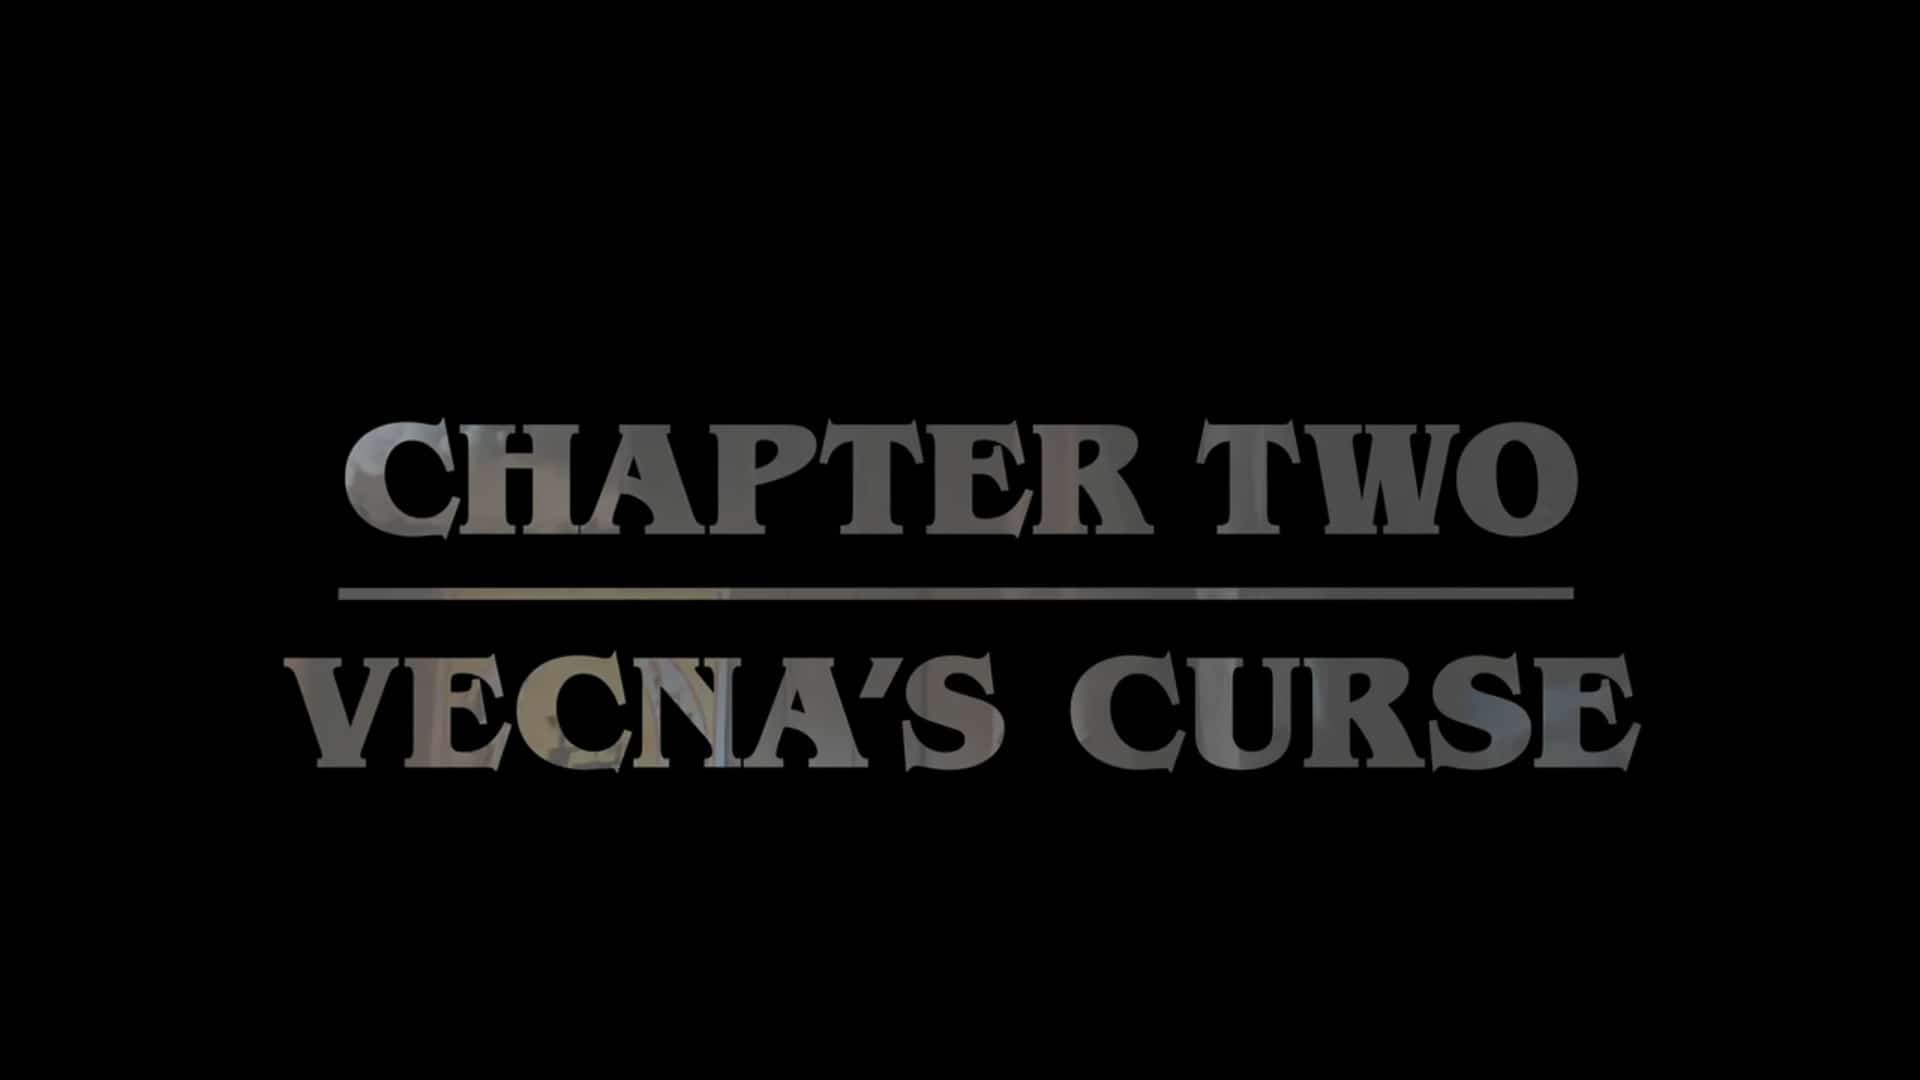 Title Card - Stranger Things Season 4 Episode 2 “Chapter Two Vecna's Curse”